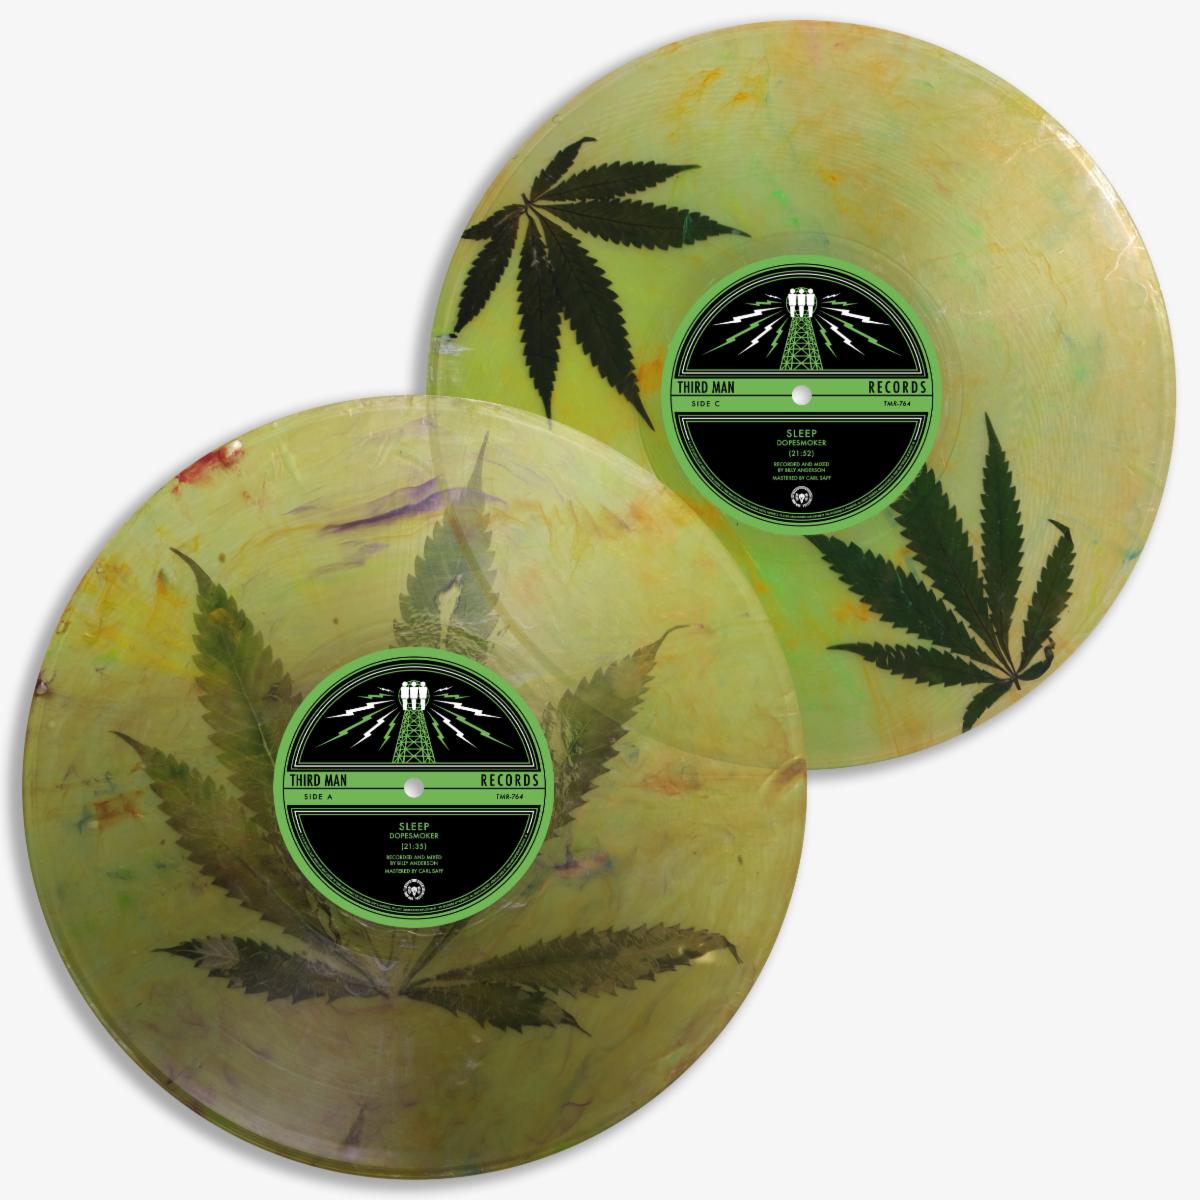 Sleep unveil ‘Dopesmoker’ deluxe LP with real cannabis leaves in vinyl